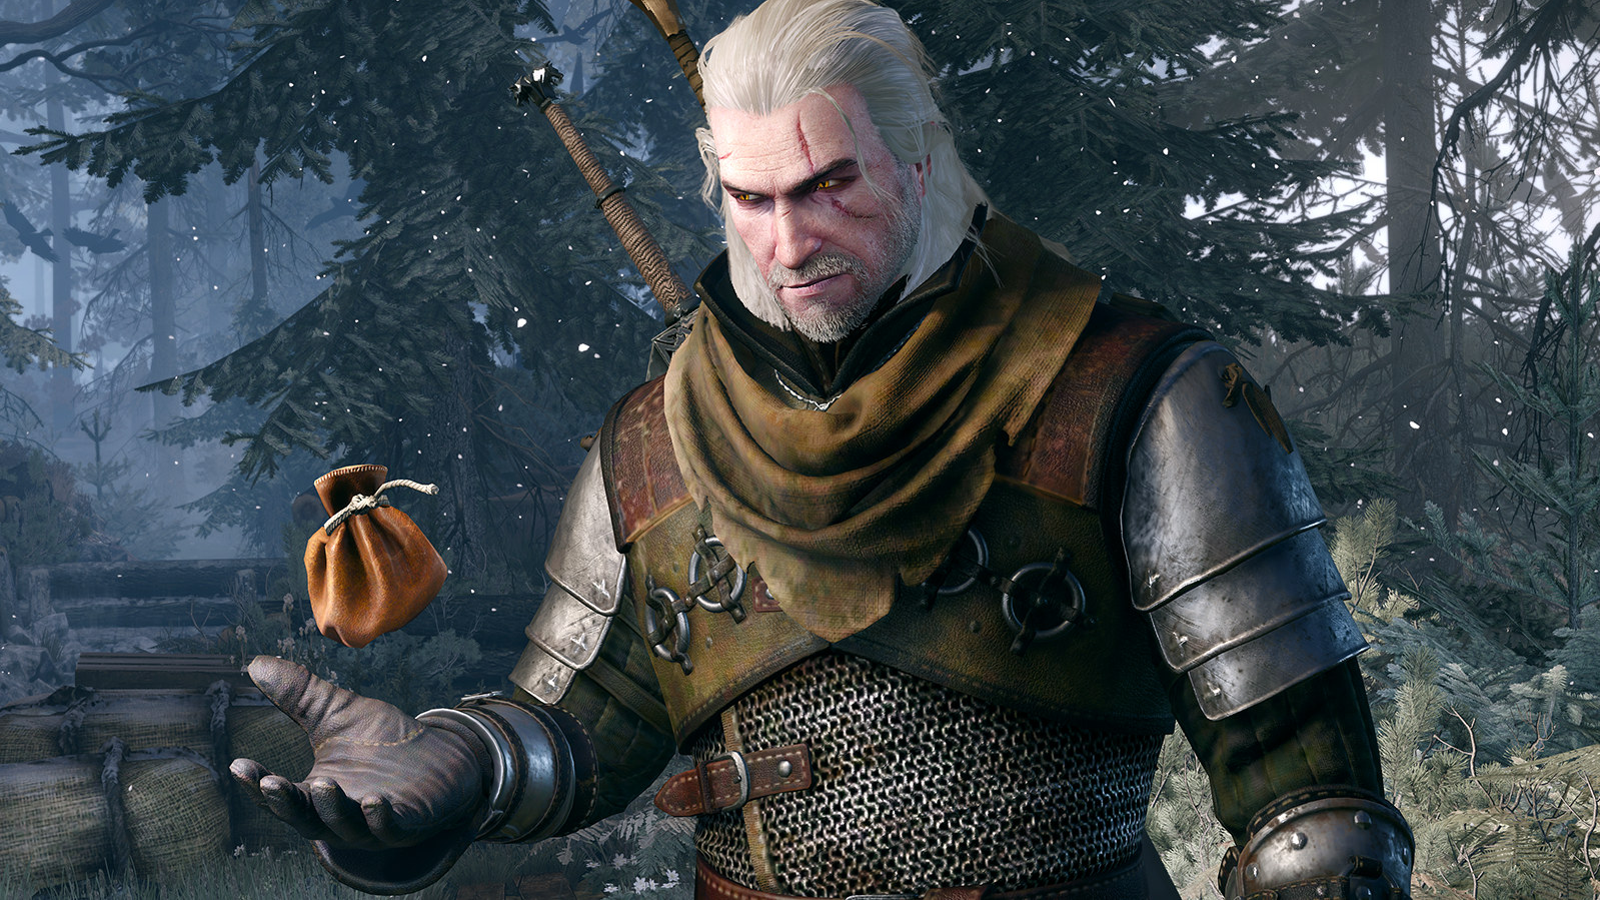 Witcher 3 Former Devs Working on Online Action Game - Fextralife